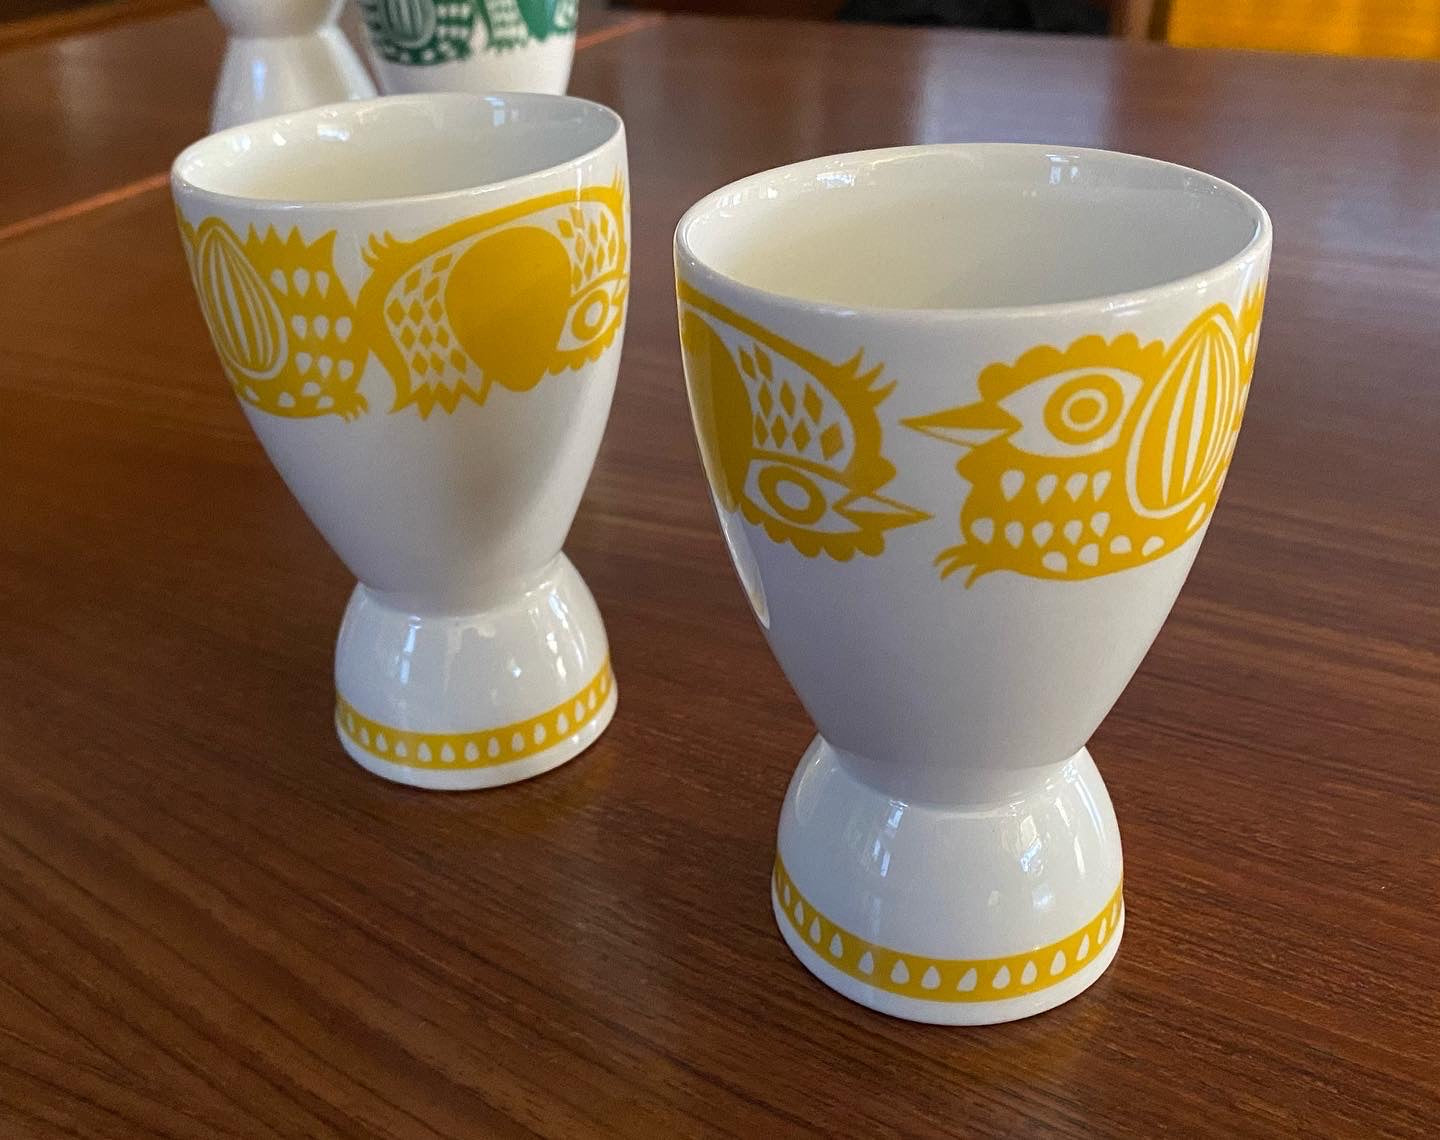 Pair of Rare 1960s Finnish "Kananpoika" Chick Dual Purpose Cups by Arabia- Cook Street Vintage